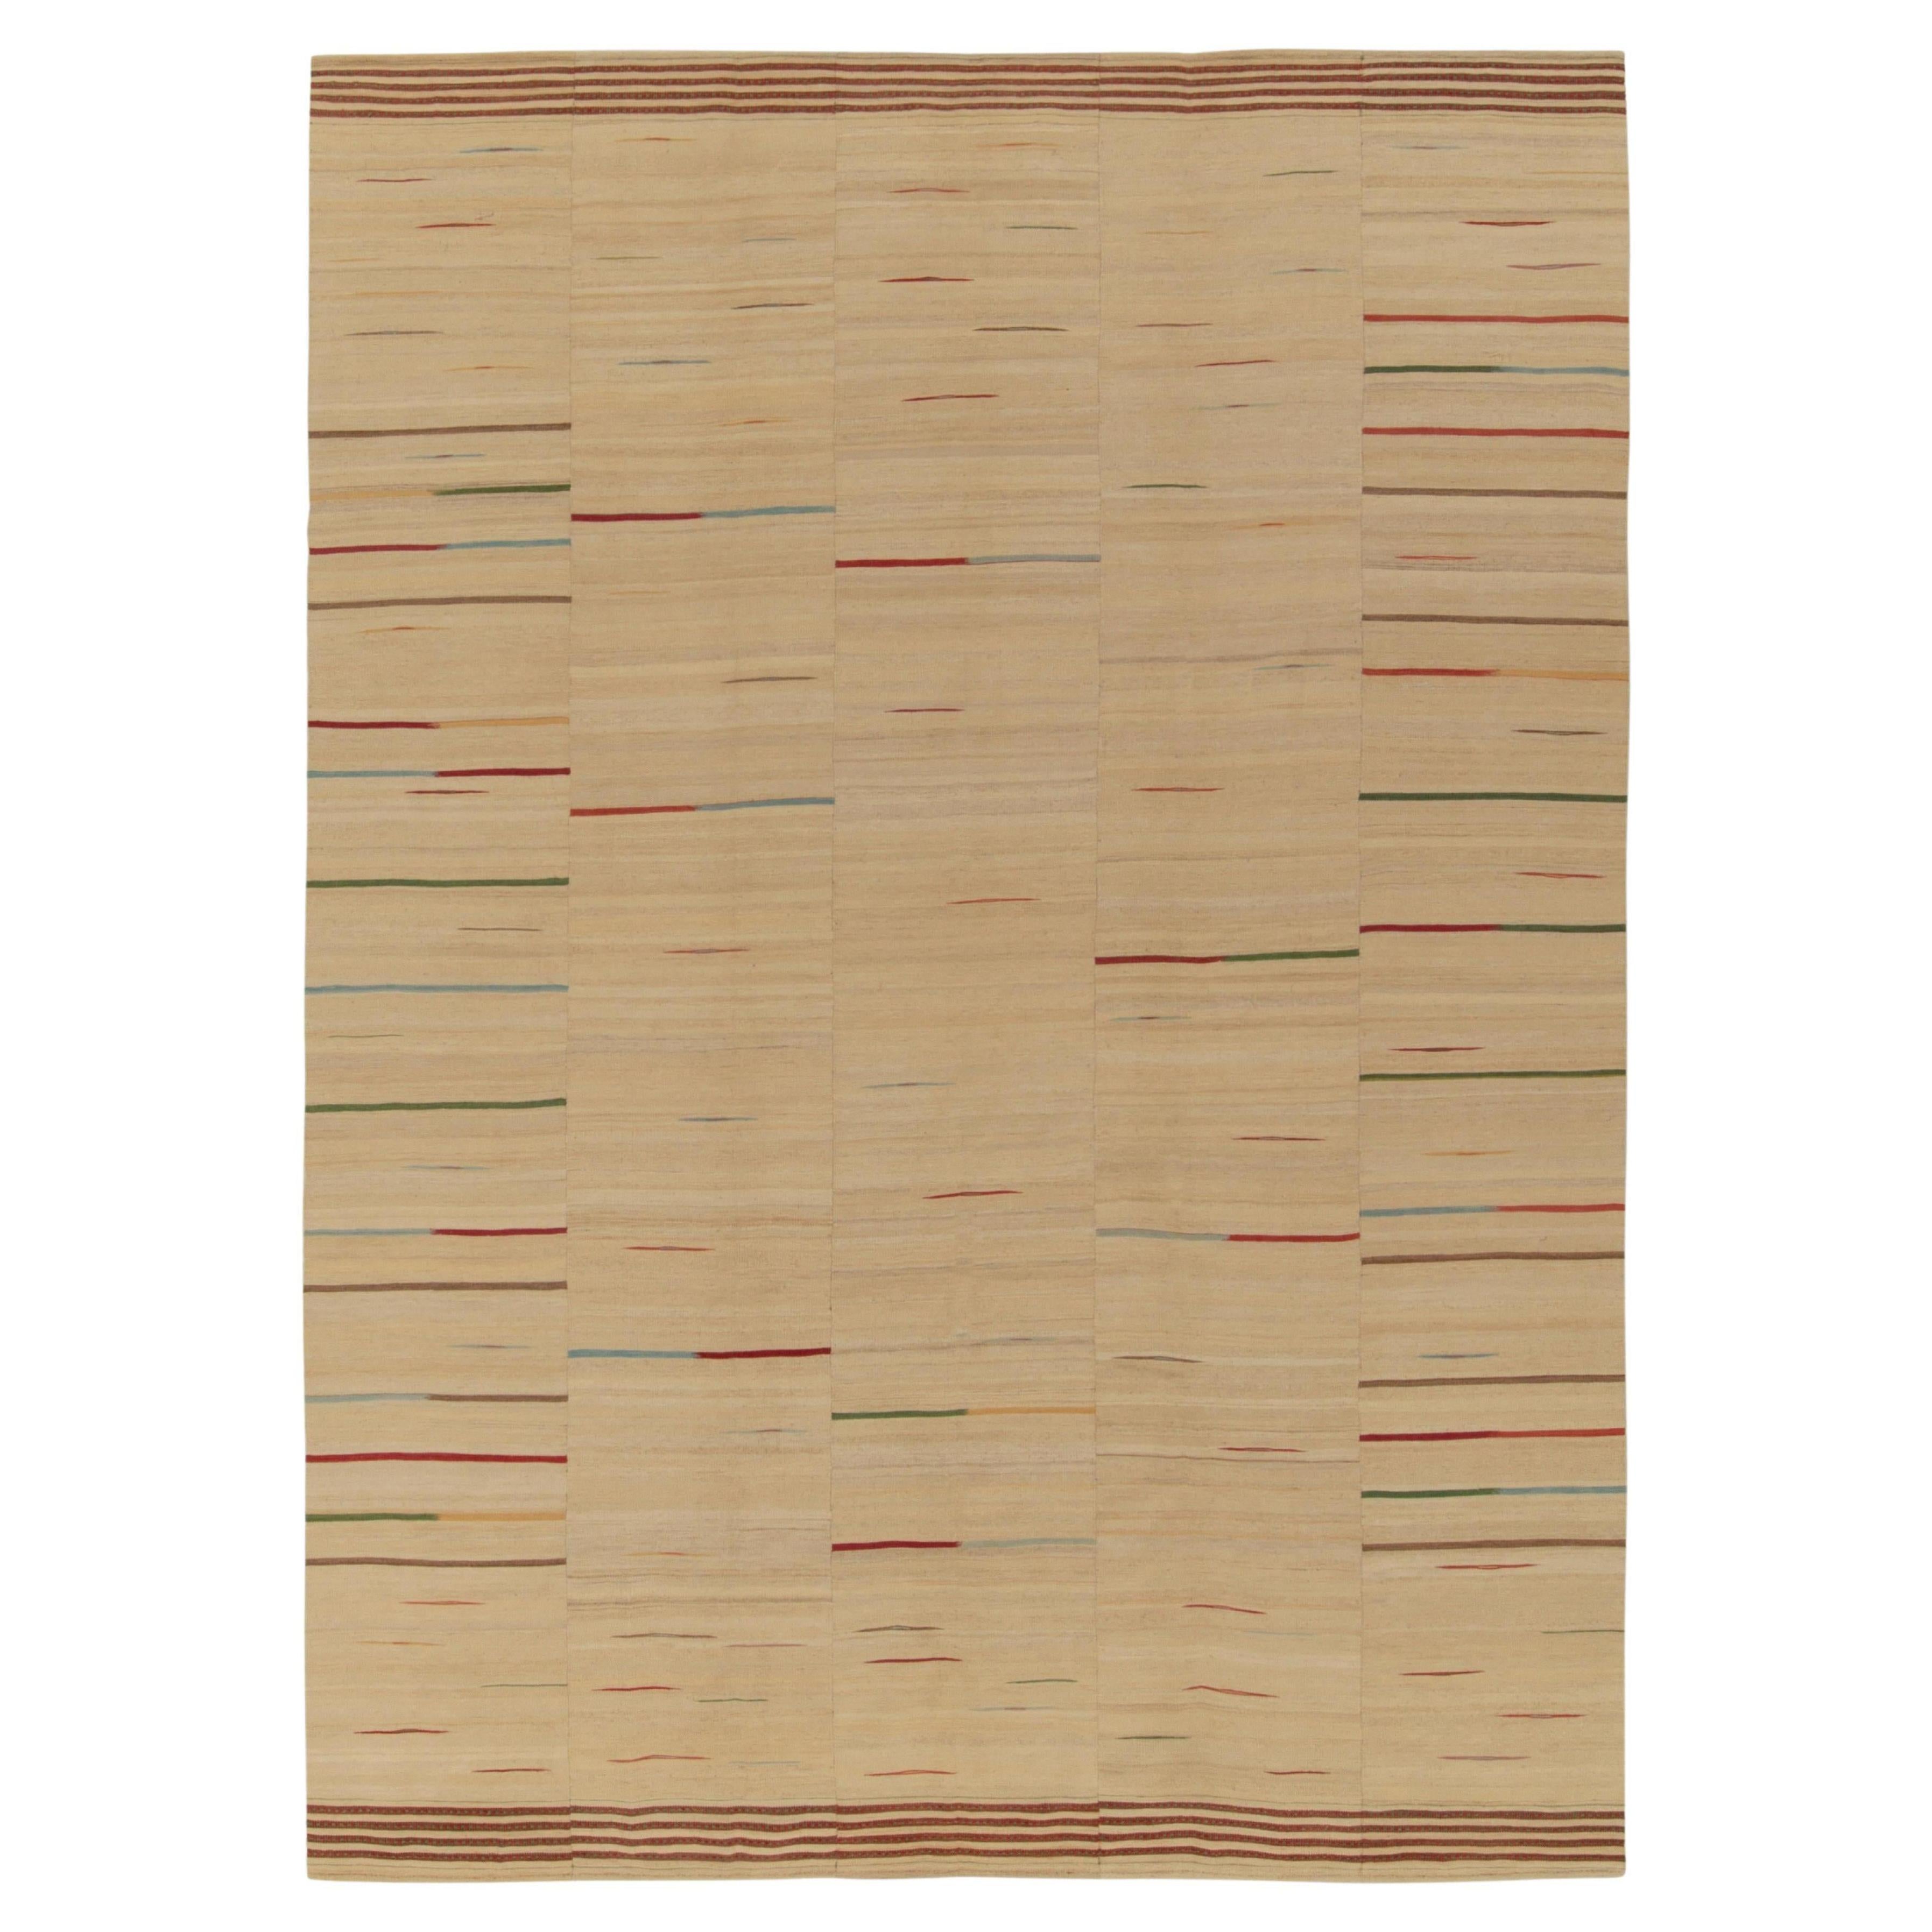 Handwoven Vintage Paneled Kilim in Beige-Brown with Colorful Accent Stripes For Sale